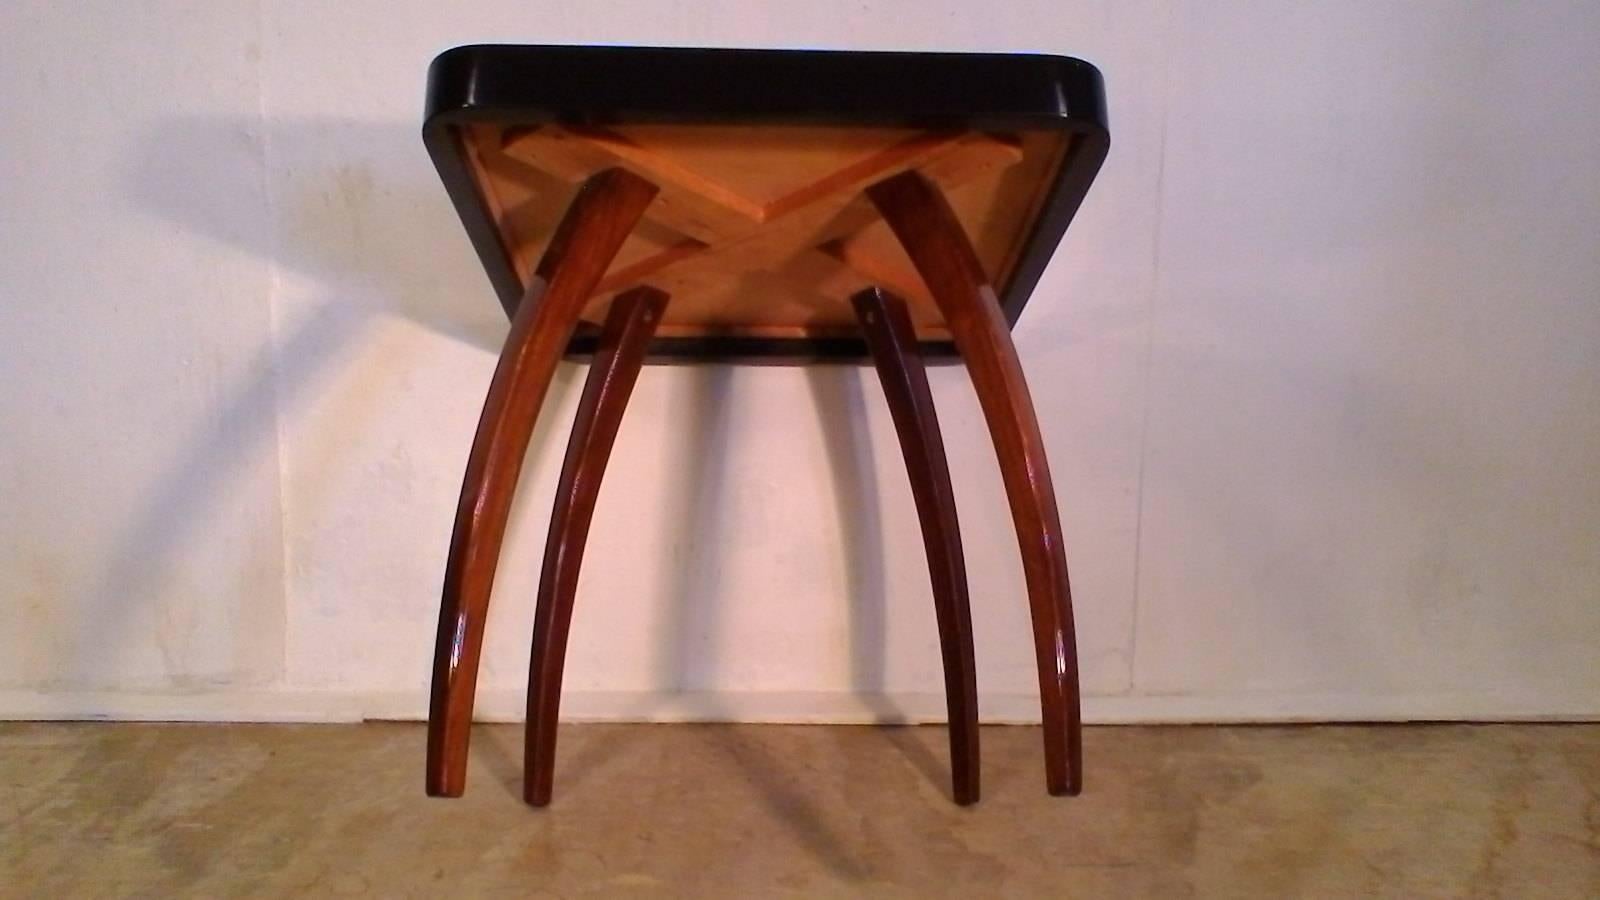 Wood Midcentury Coffee Table, Spider, Design by Jindrich Halabala, 1930 For Sale